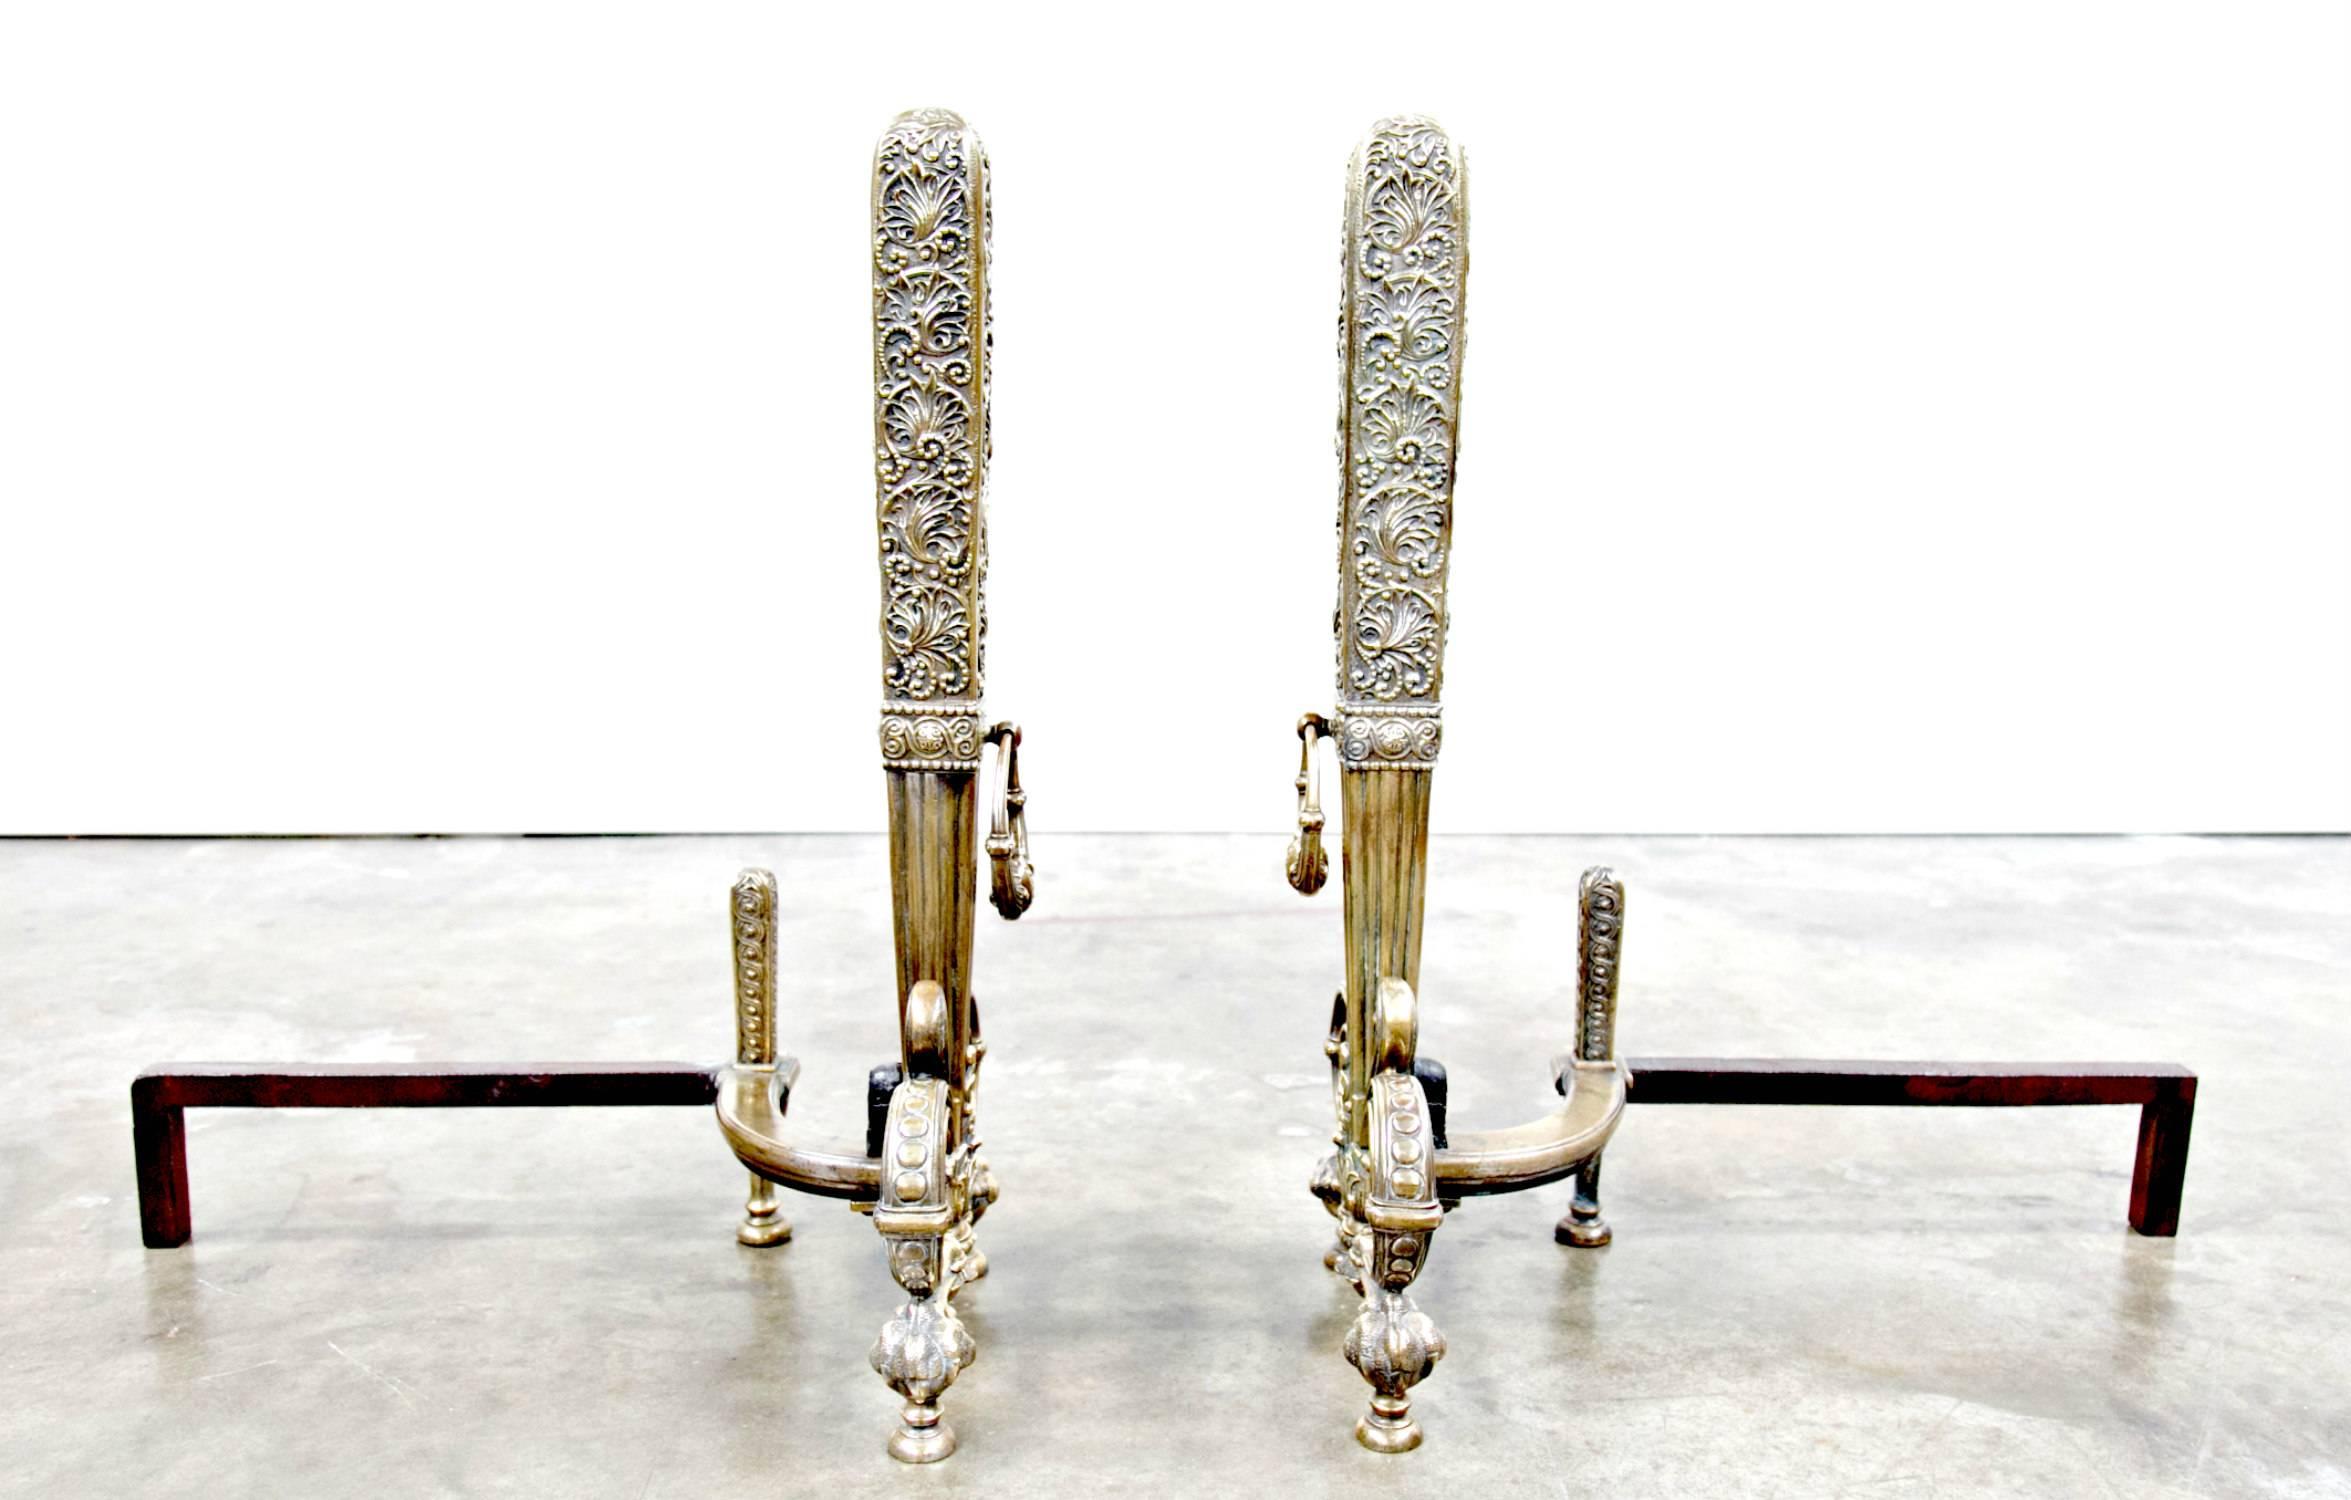 American Fine Pair of Brass and Wrought Iron Andirons Attributed to Tiffany Studios For Sale